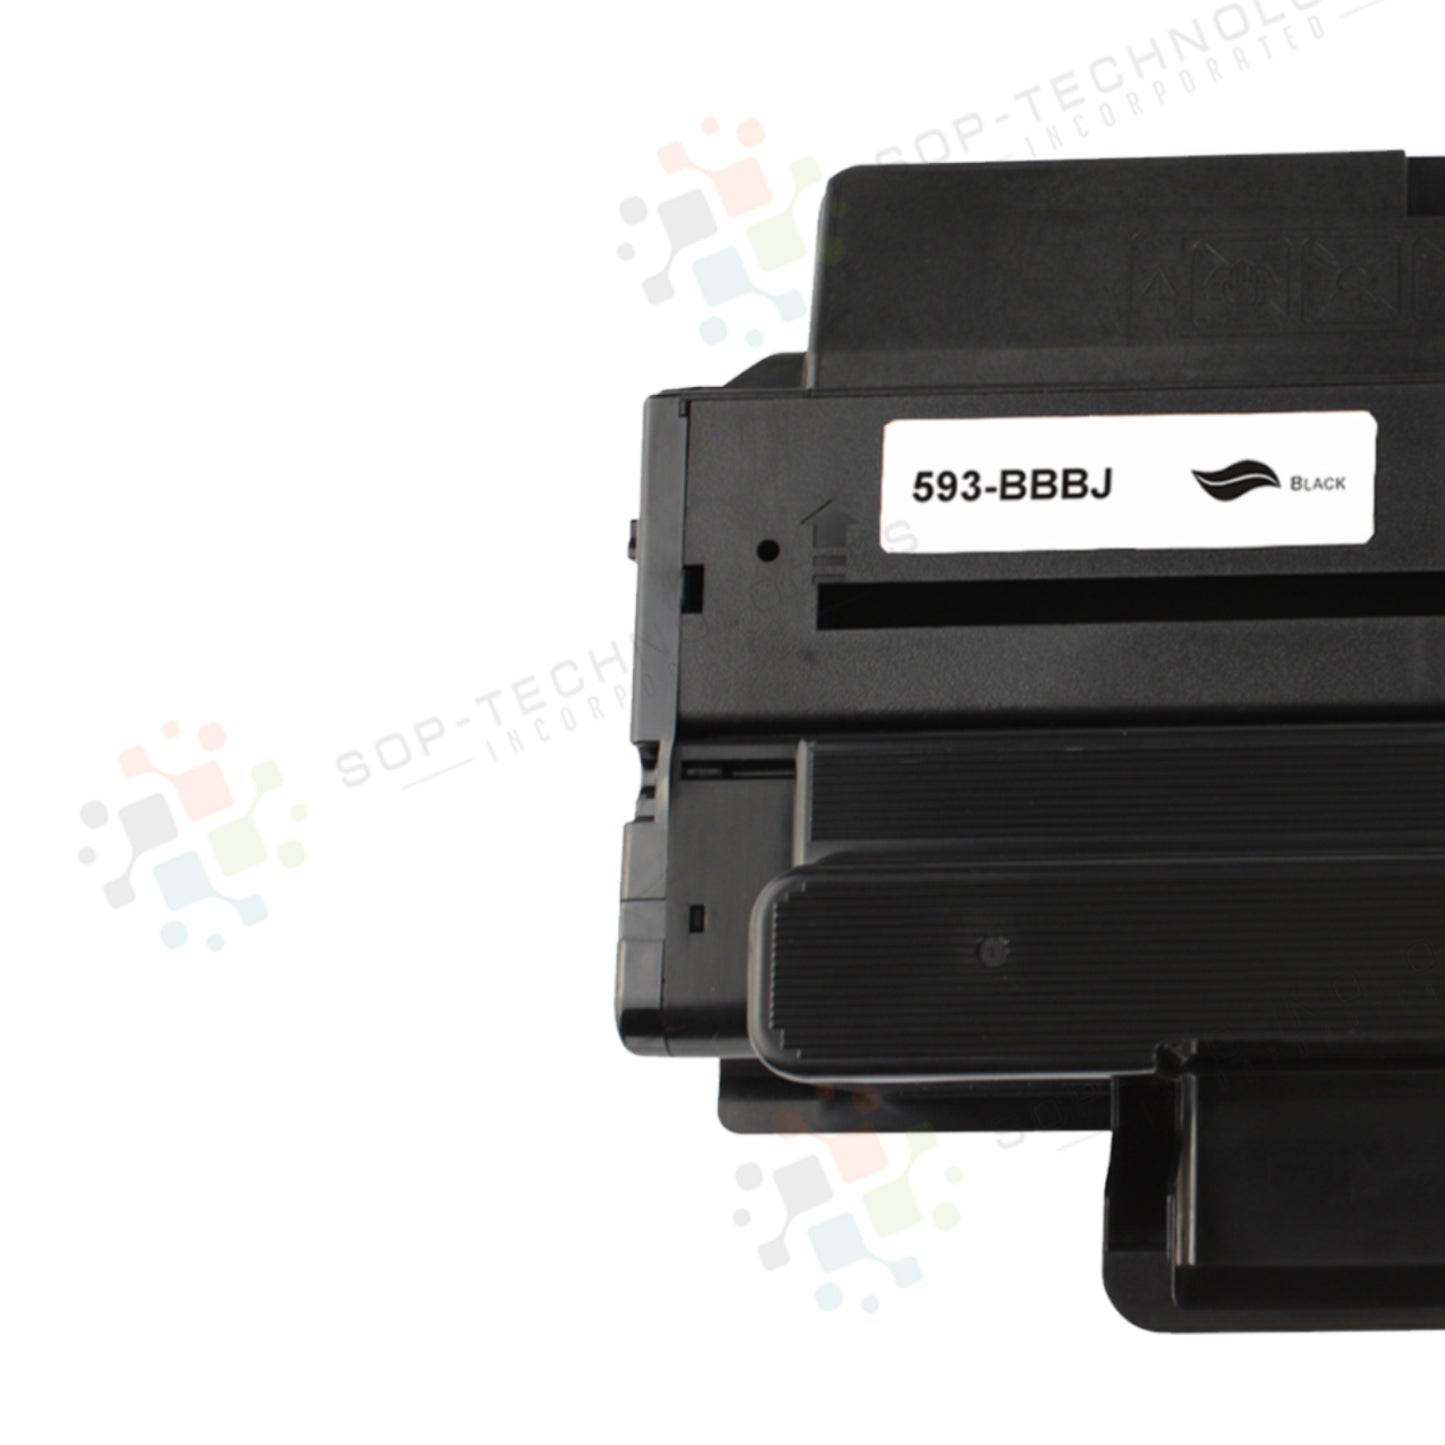 3 Pack Compatible Toner Cartridge Replacement for Dell B2375dnf - SOP-TECHNOLOGIES, INC.